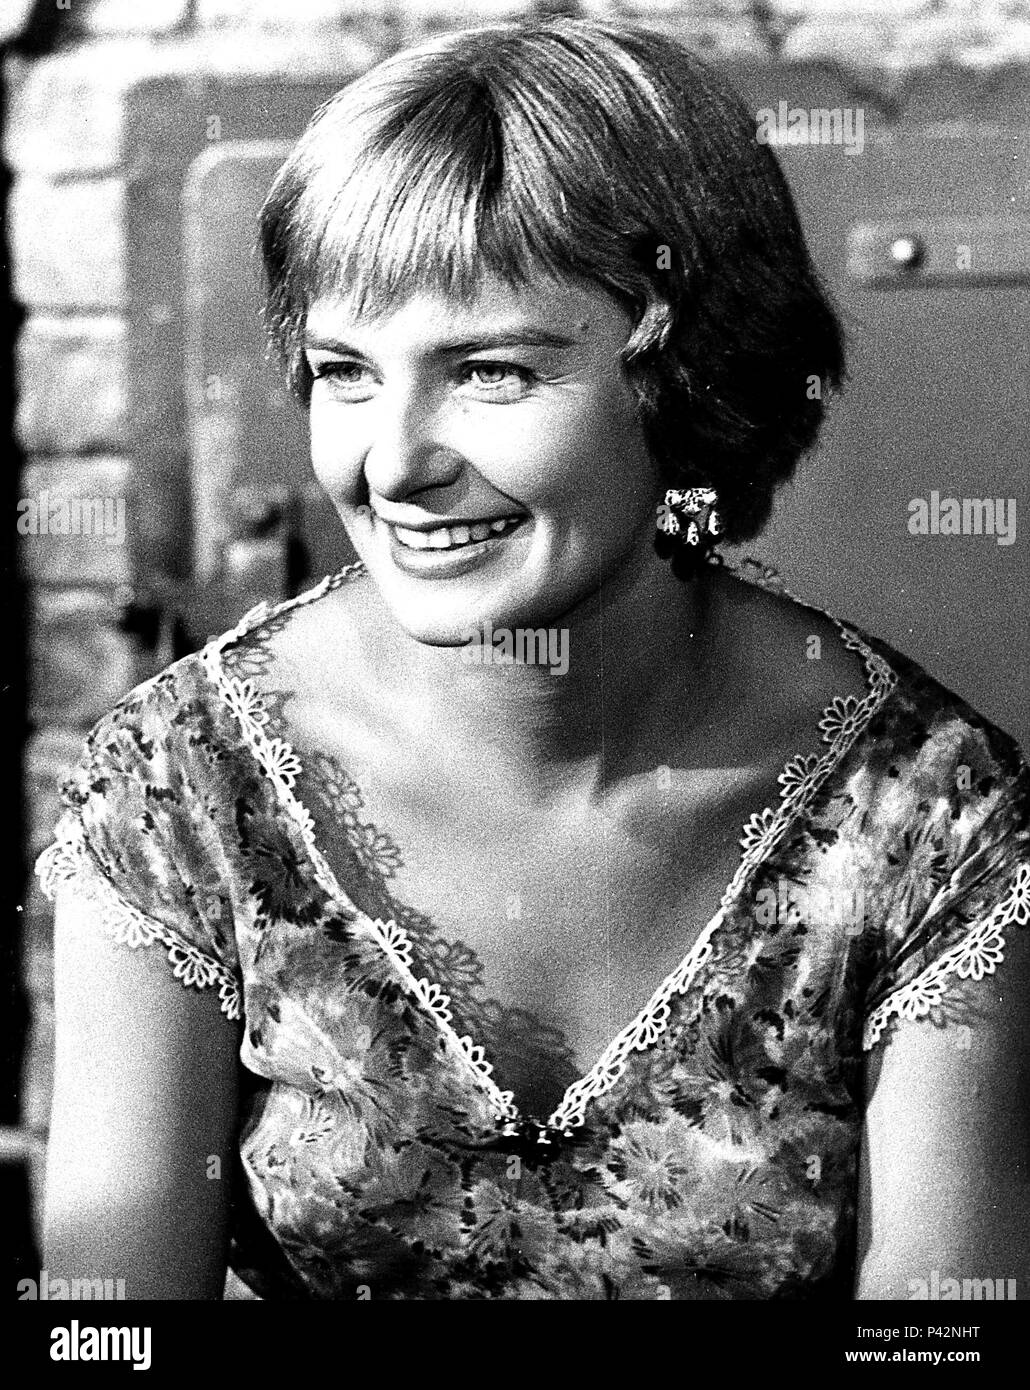 Joanne woodward hi-res stock photography and images - Alamy